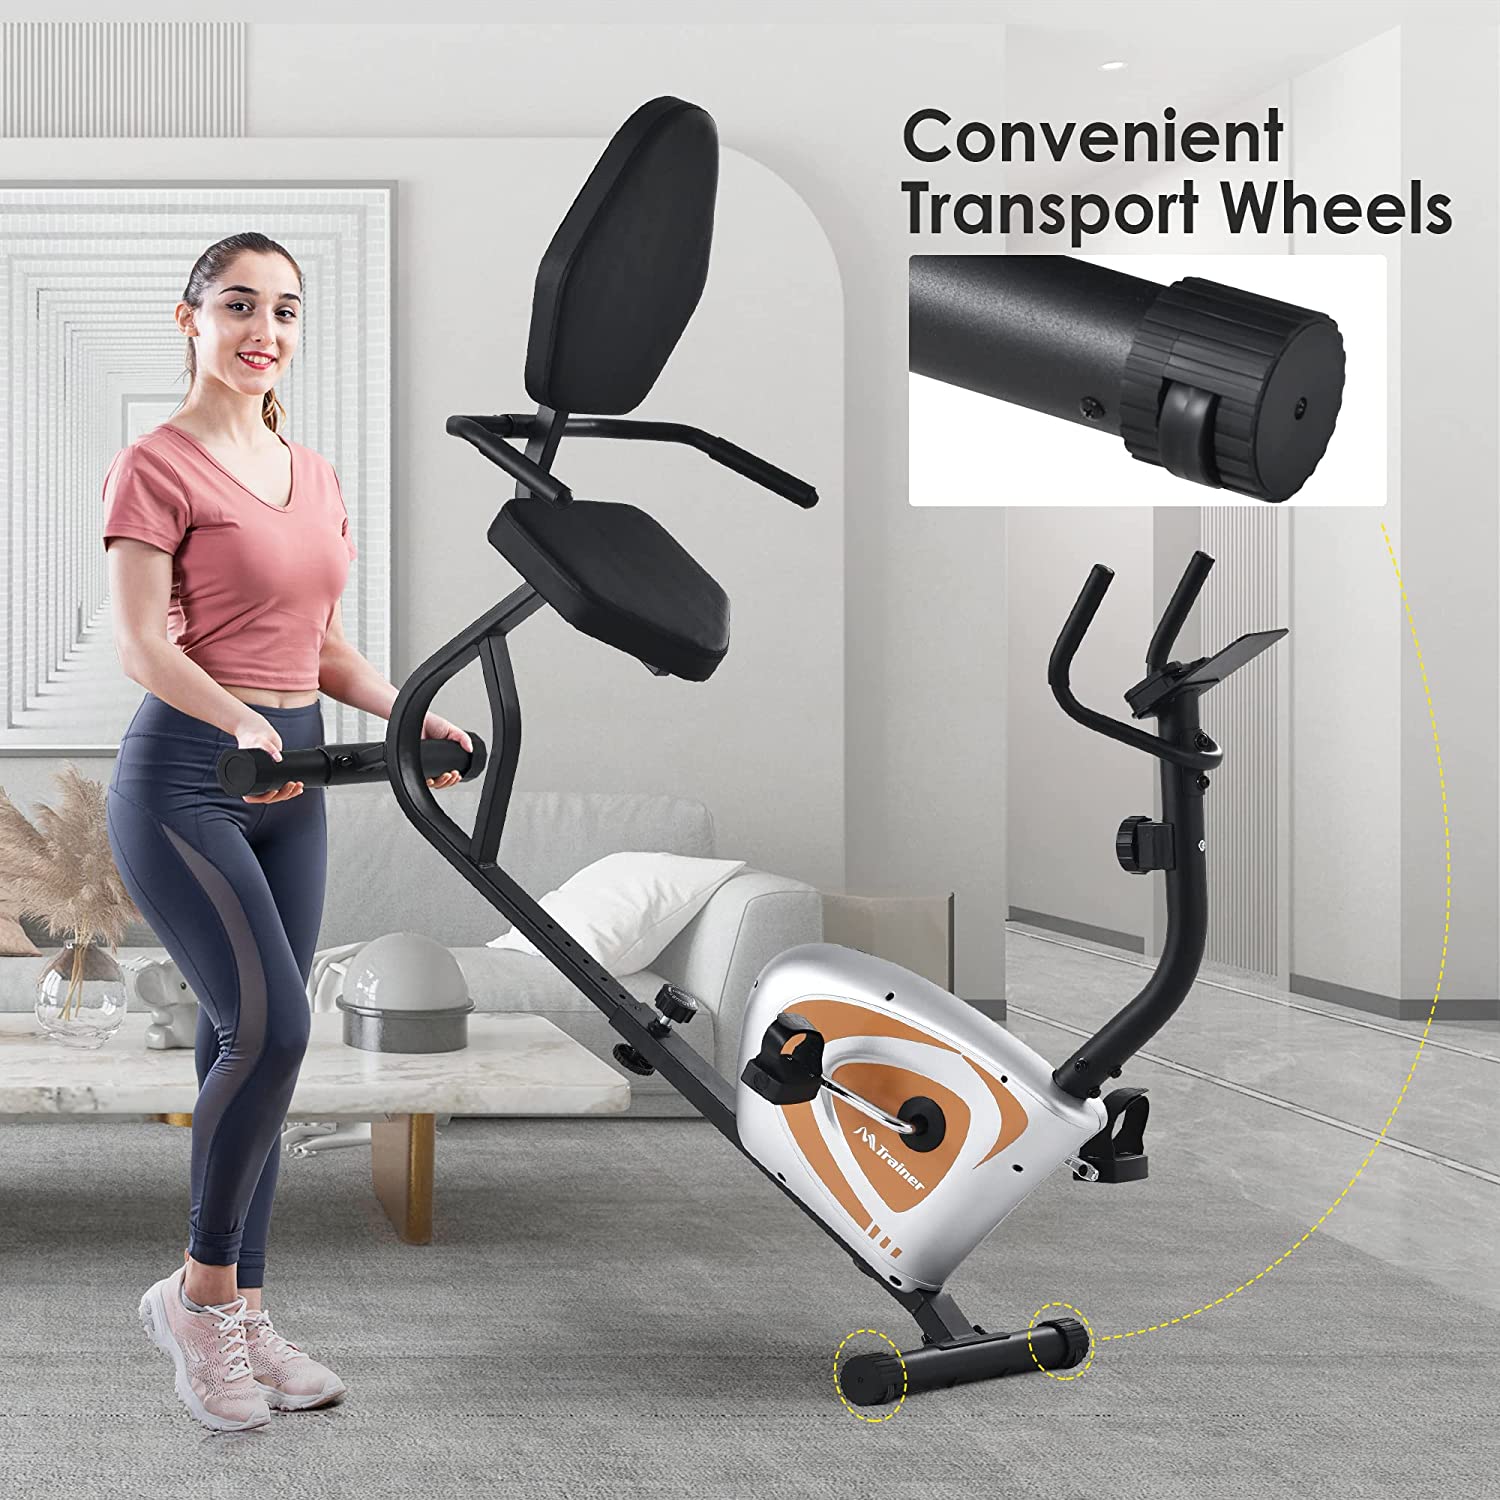 YY Style Indoor Recumbent Exercise Bike with Wheel, Stationary Exercise Bike with LCD and Bluetooth Monitor, Fitness Exercise Equipment for Home and Office, 8-level Resistance, 380 Lbs. Capacity, R092 - image 5 of 8